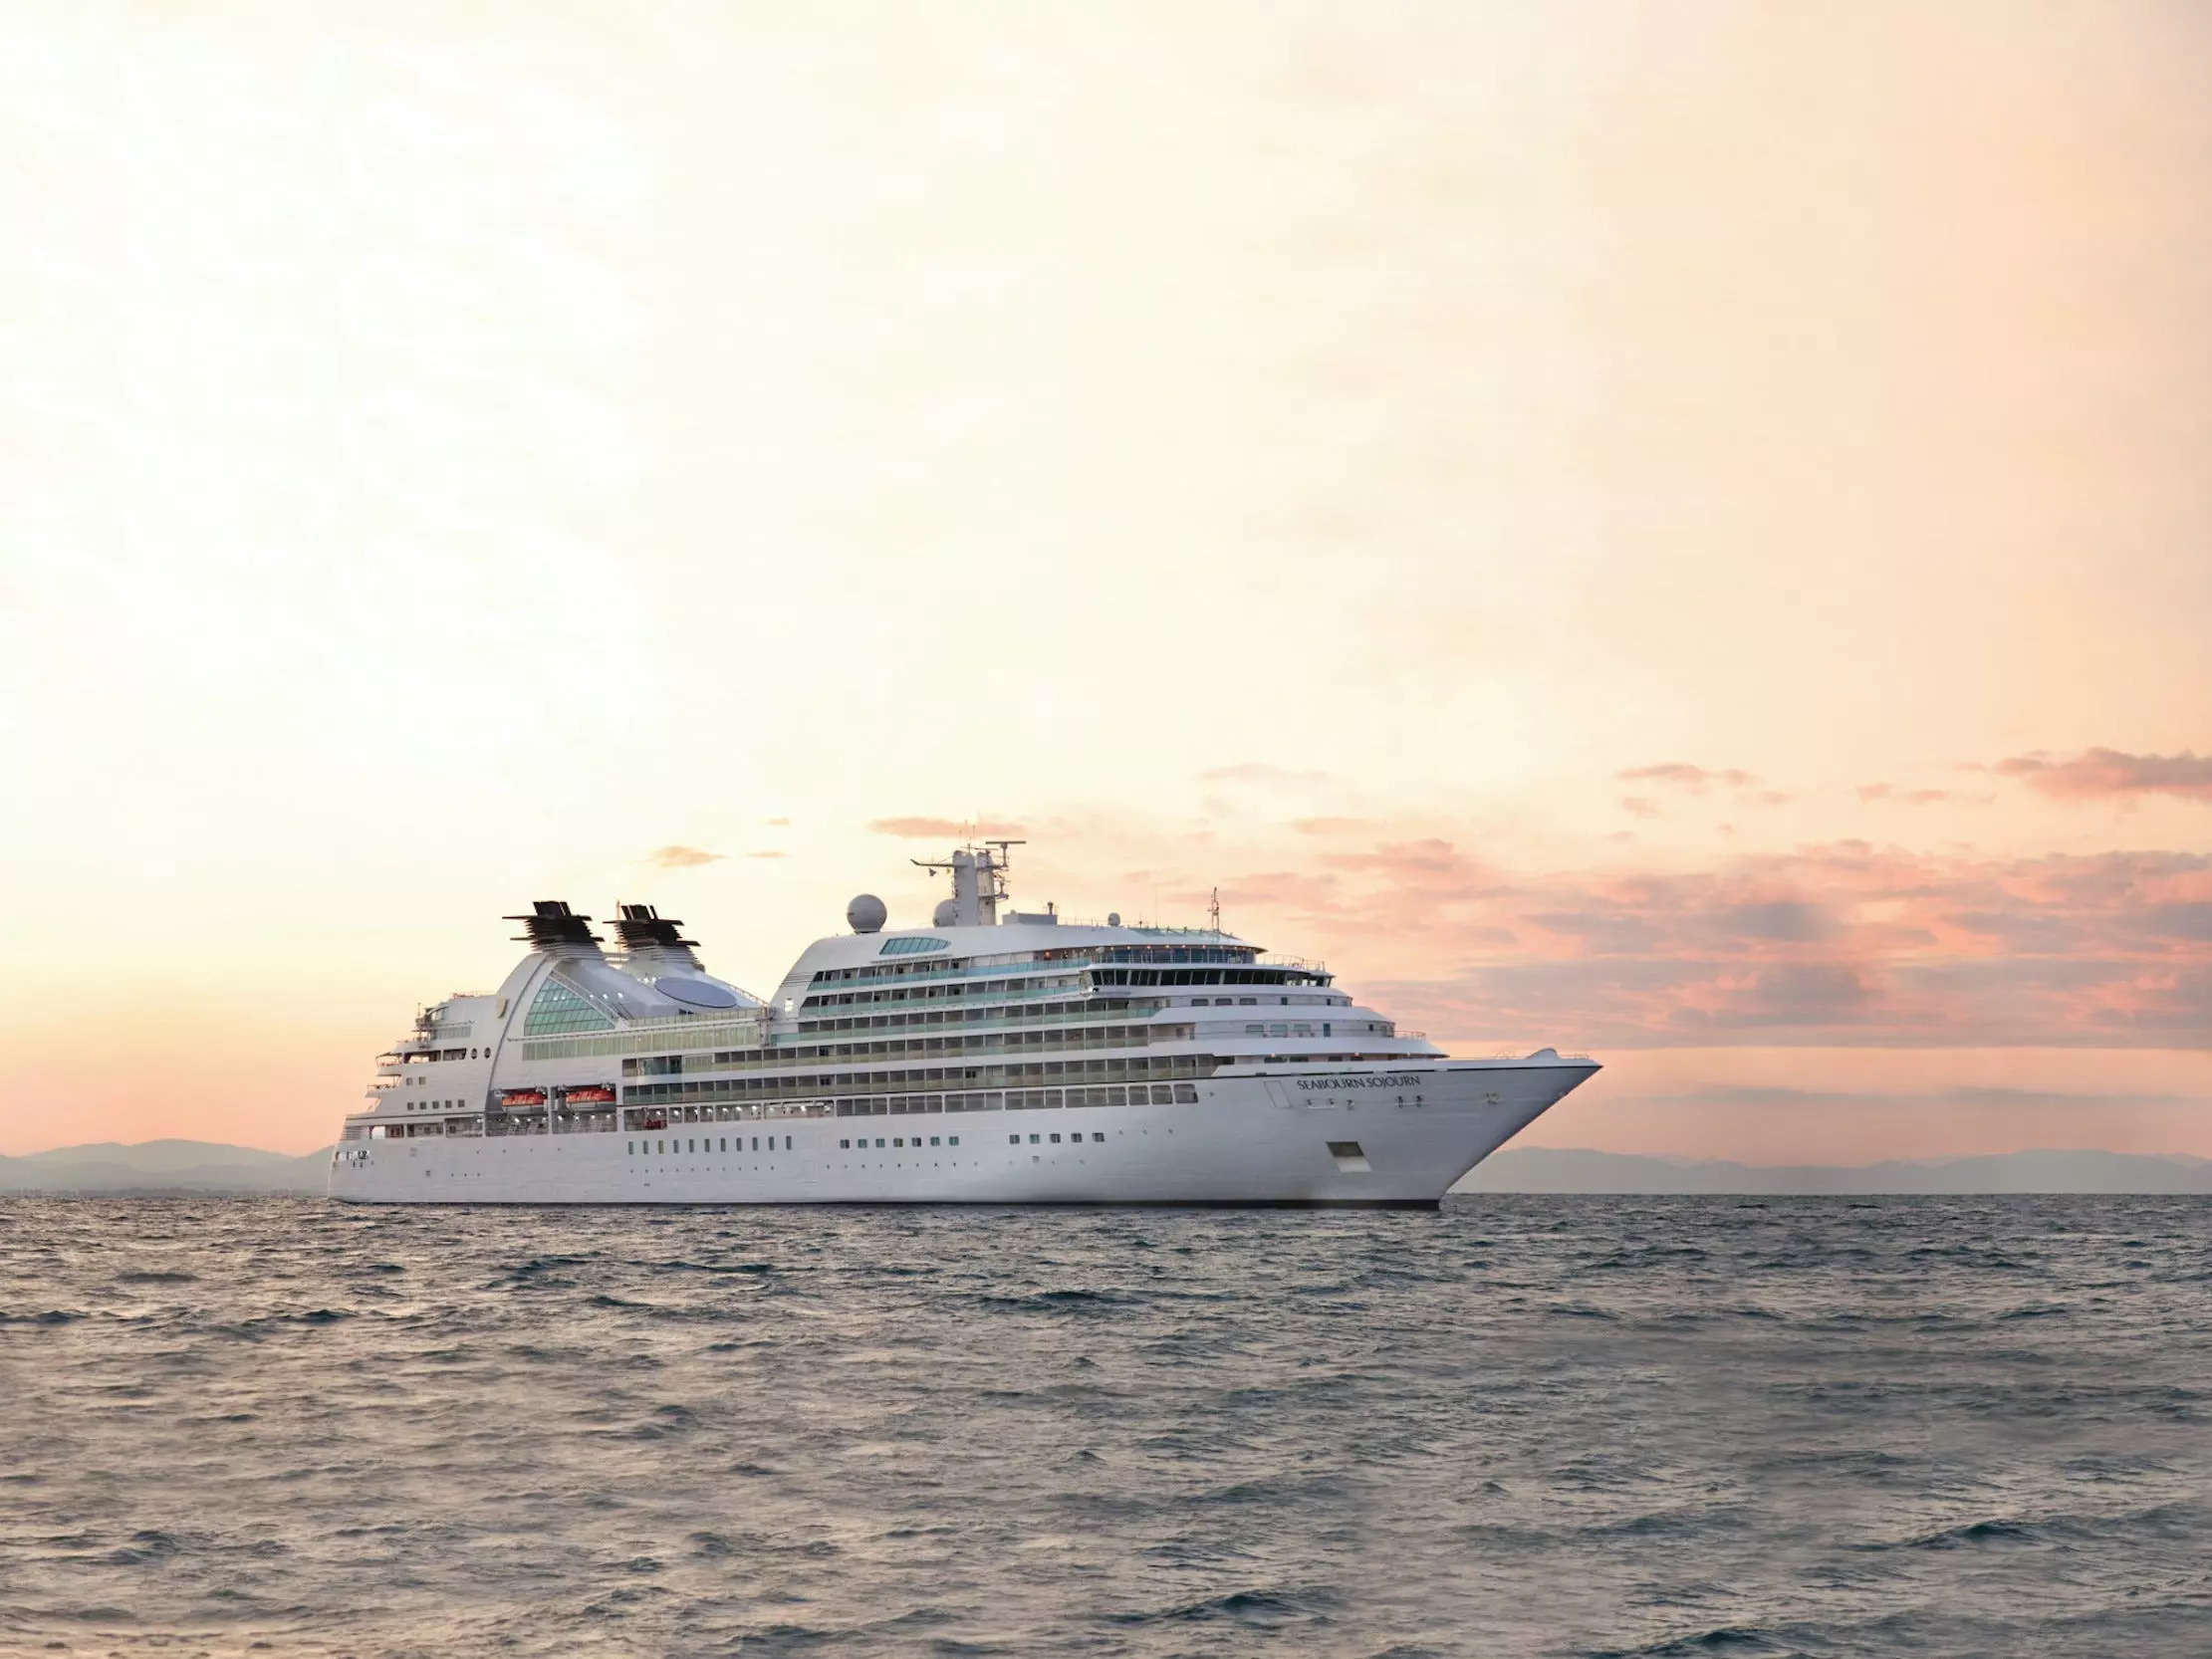 The Seabourn Sojourn.